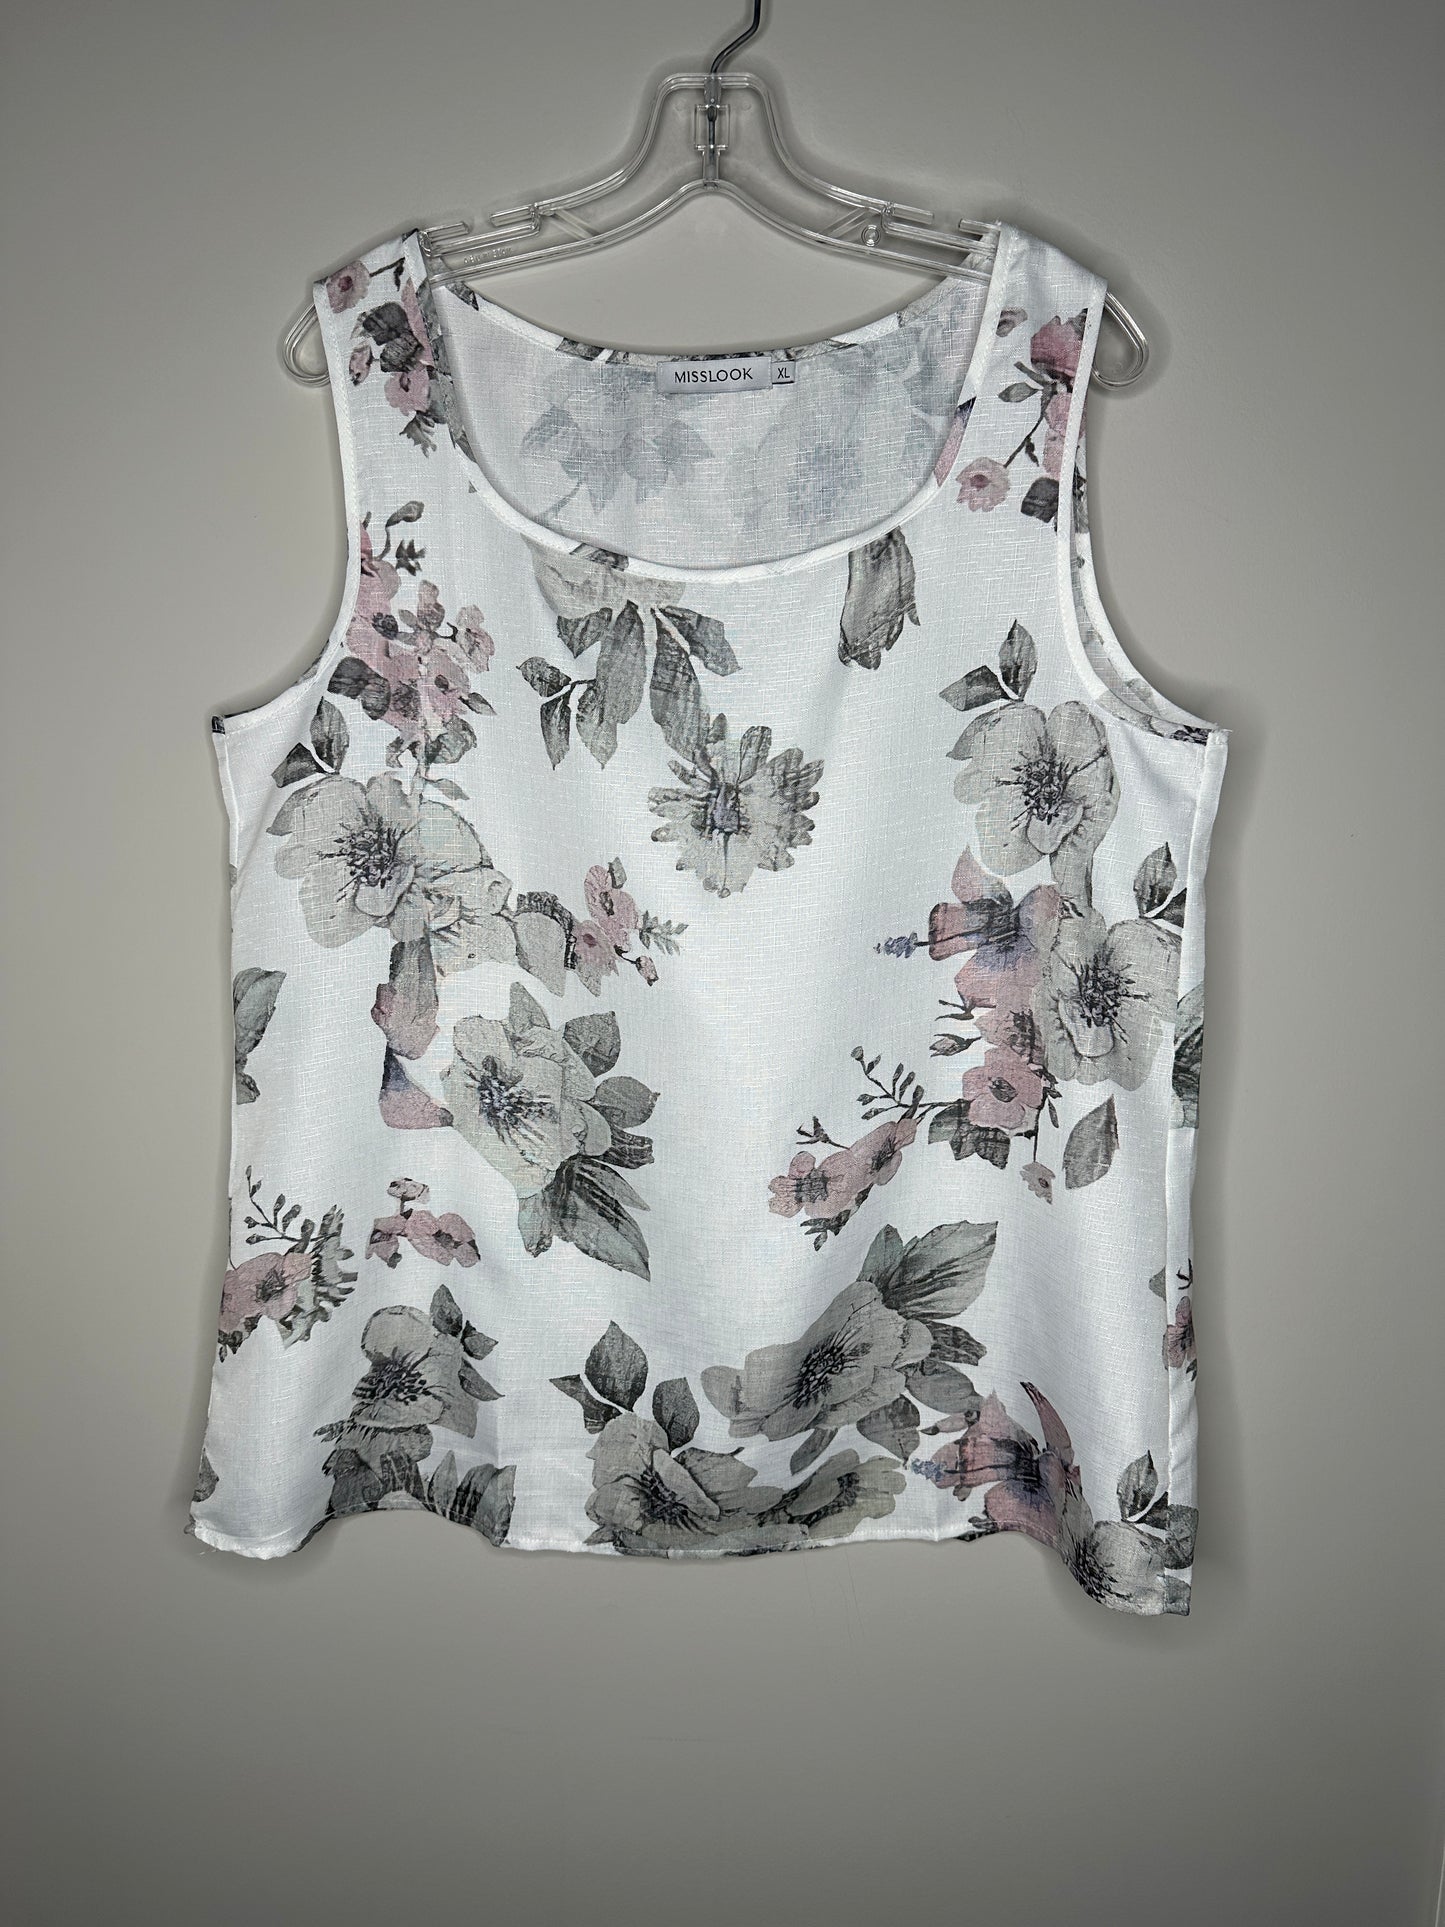 Misslook Size XL White w/Gray & Lavender Floral Sleeveless Top, new/NWOT